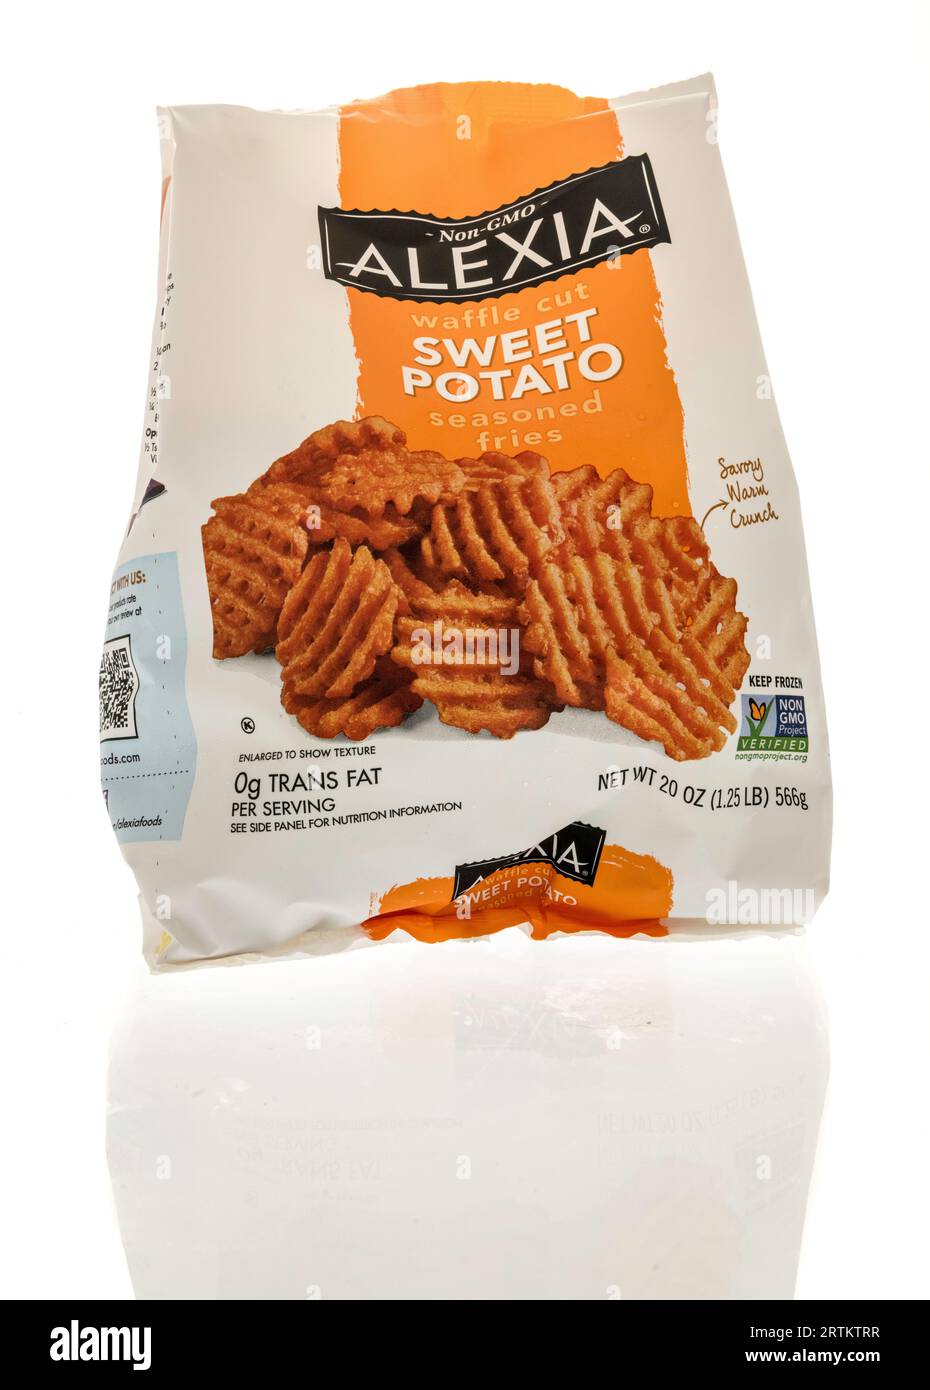 Winneconne, WI - 4 September 2023:  A package of Alexia sweet potato seasoned fries on an isolated background Stock Photo